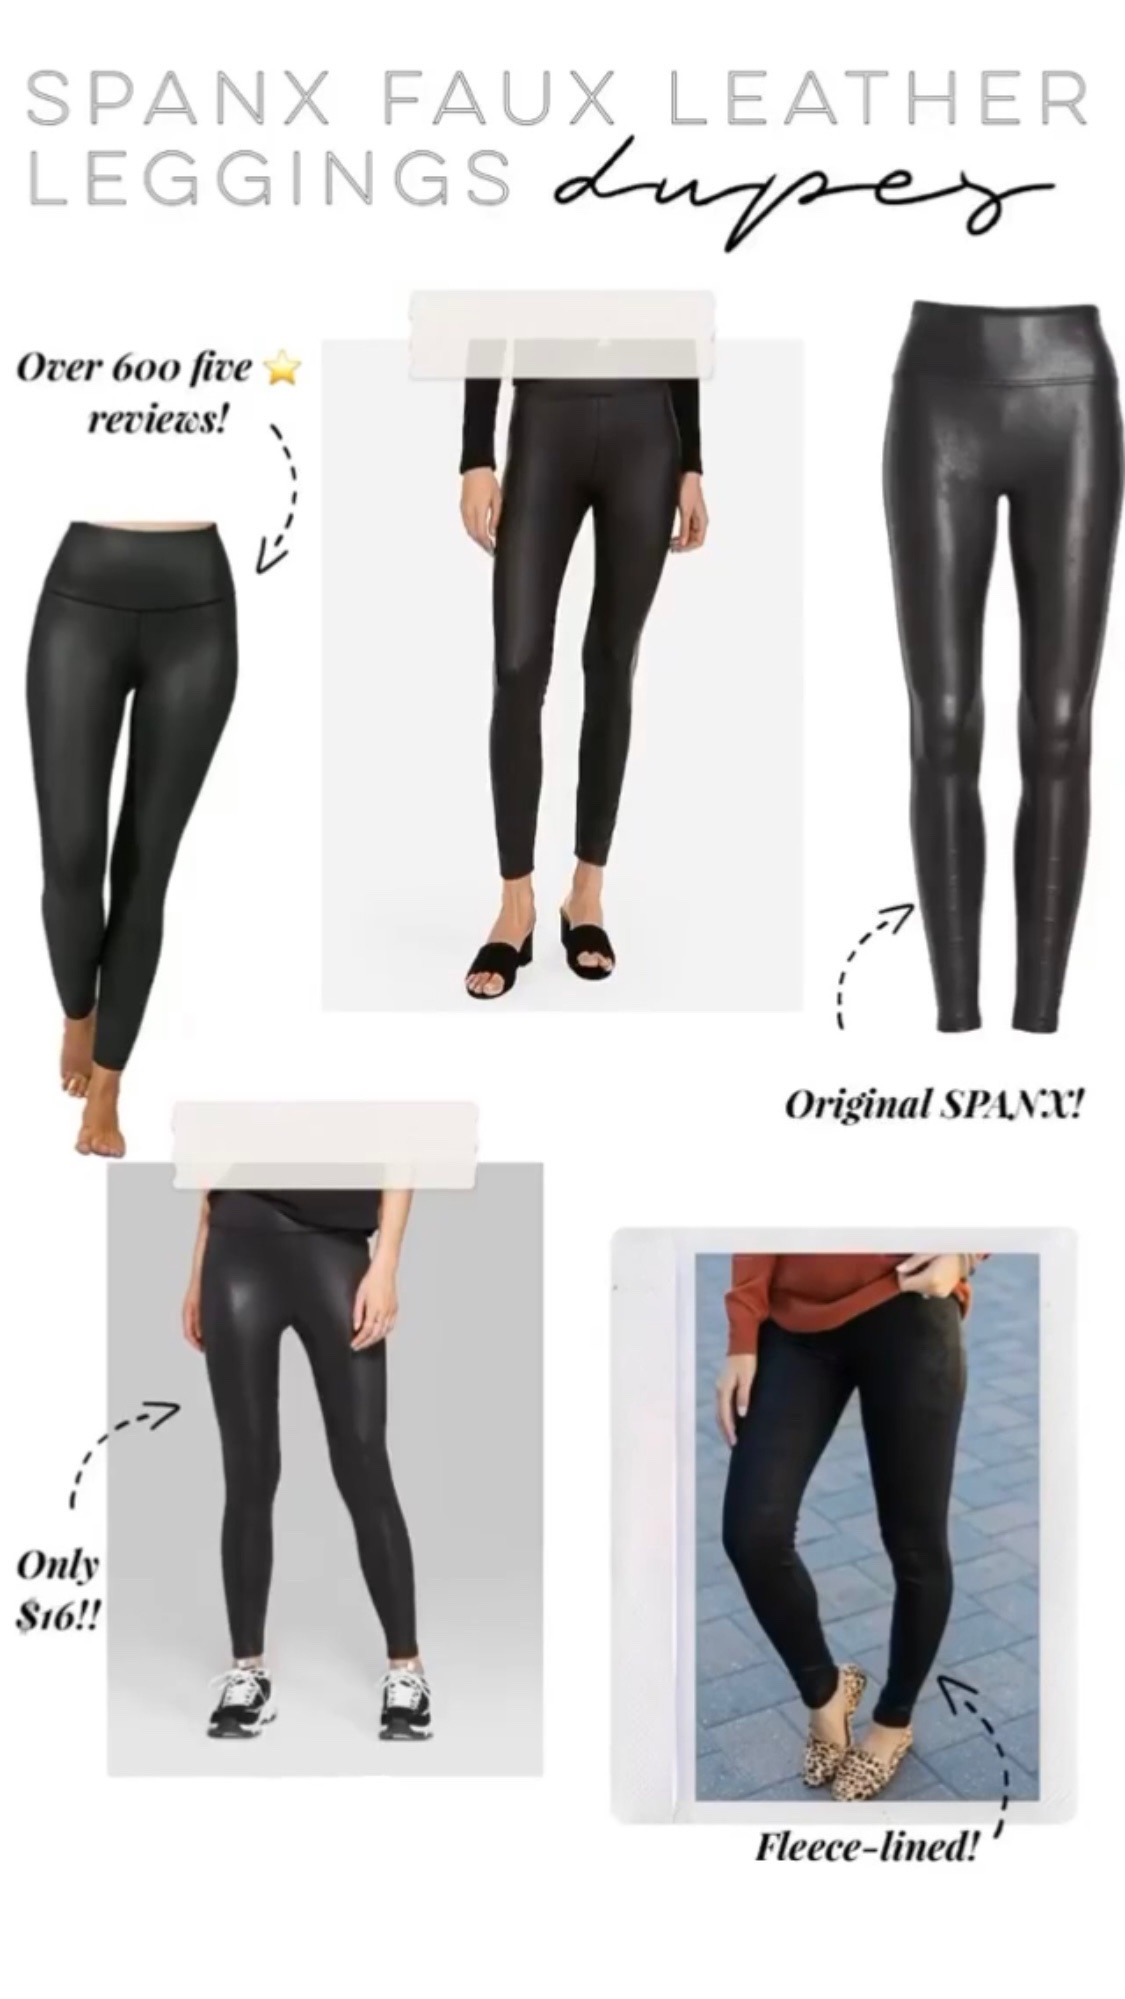 I tried these Walmart dupes for $98 Spanx leather leggings - they